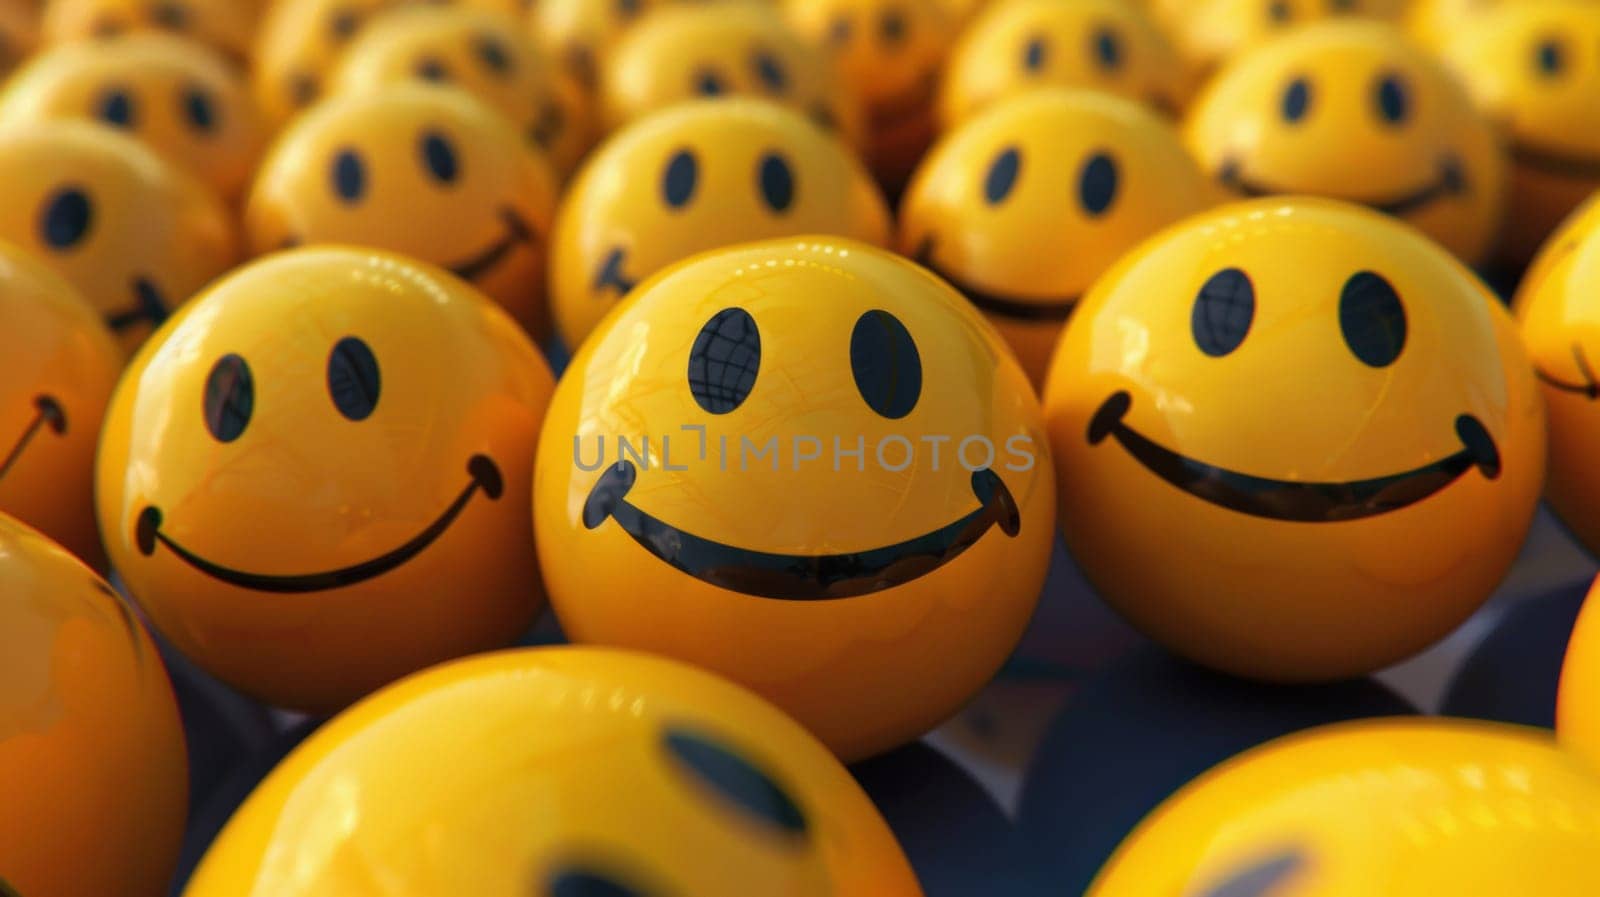 Many cute yellow smiley faces together.